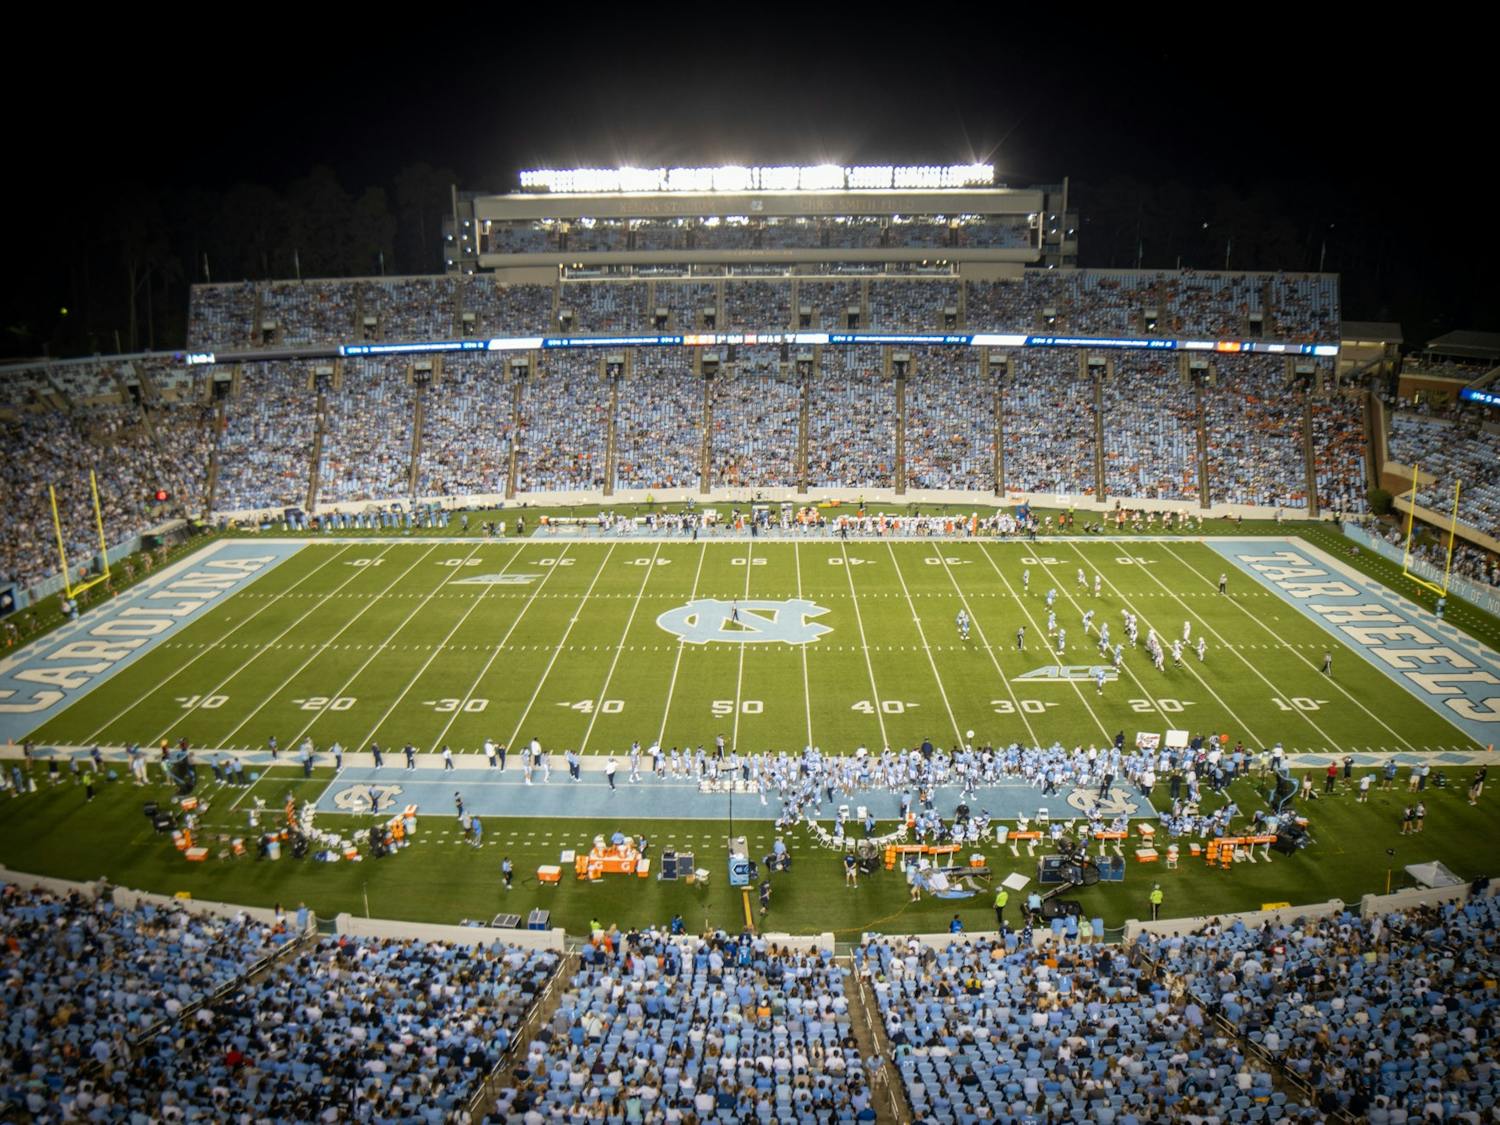 Kenan Stadium pictured during UNC football's home matchup against the University of Virginia Cavaliers on Sept. 18.